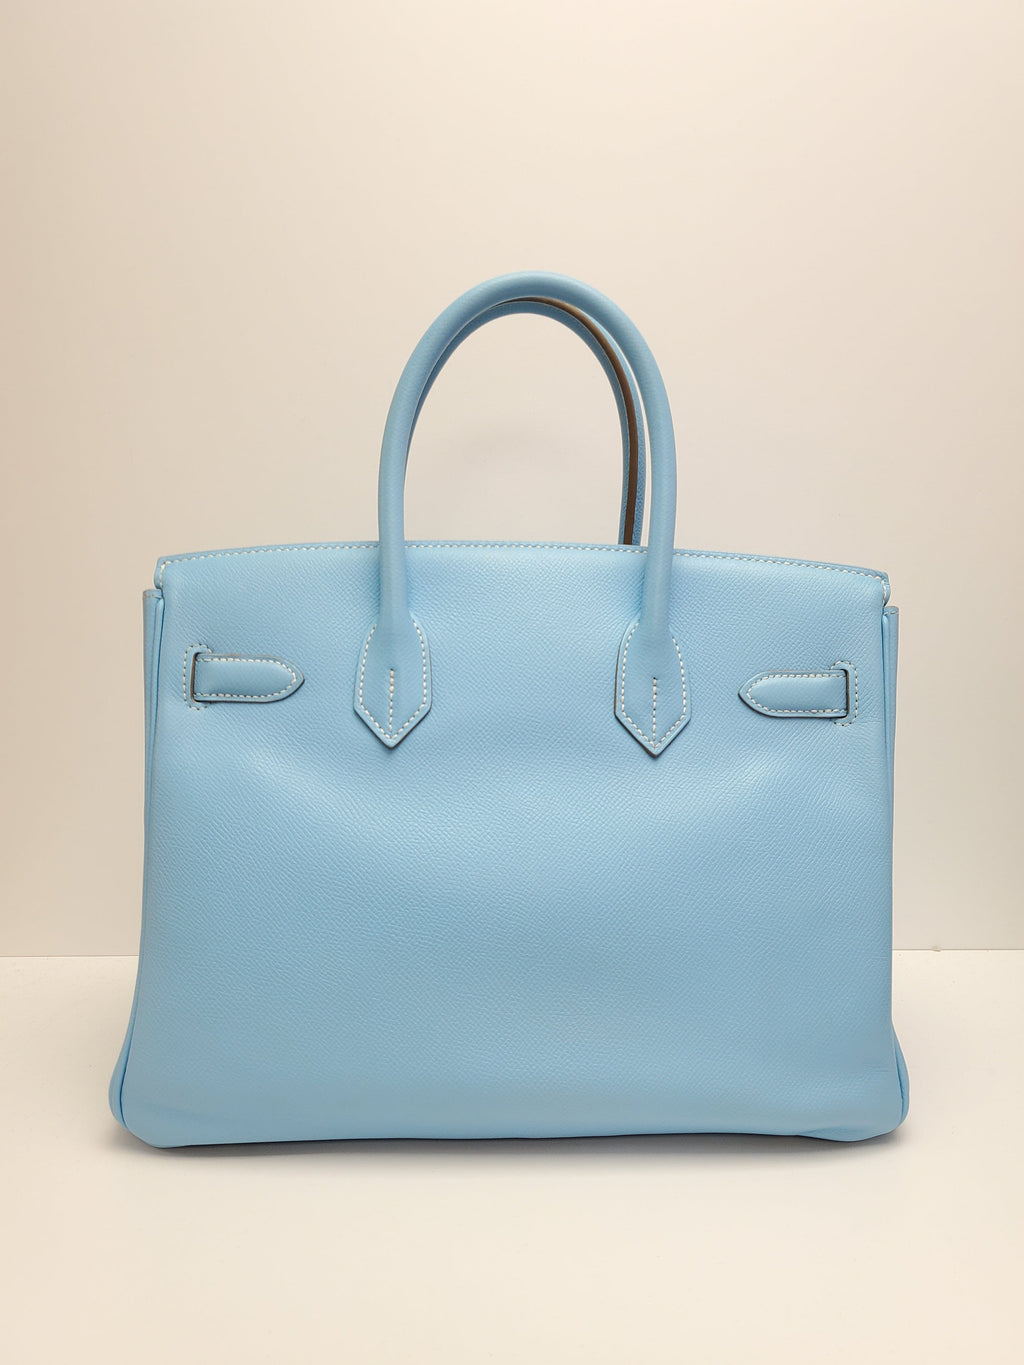 Hermès Exceptional & Rare Hermes Birkin 35 limited edition Candy Collection  in Celestial Blue Epsom leather with Mykonos blue leather interior  ref.771481 - Joli Closet